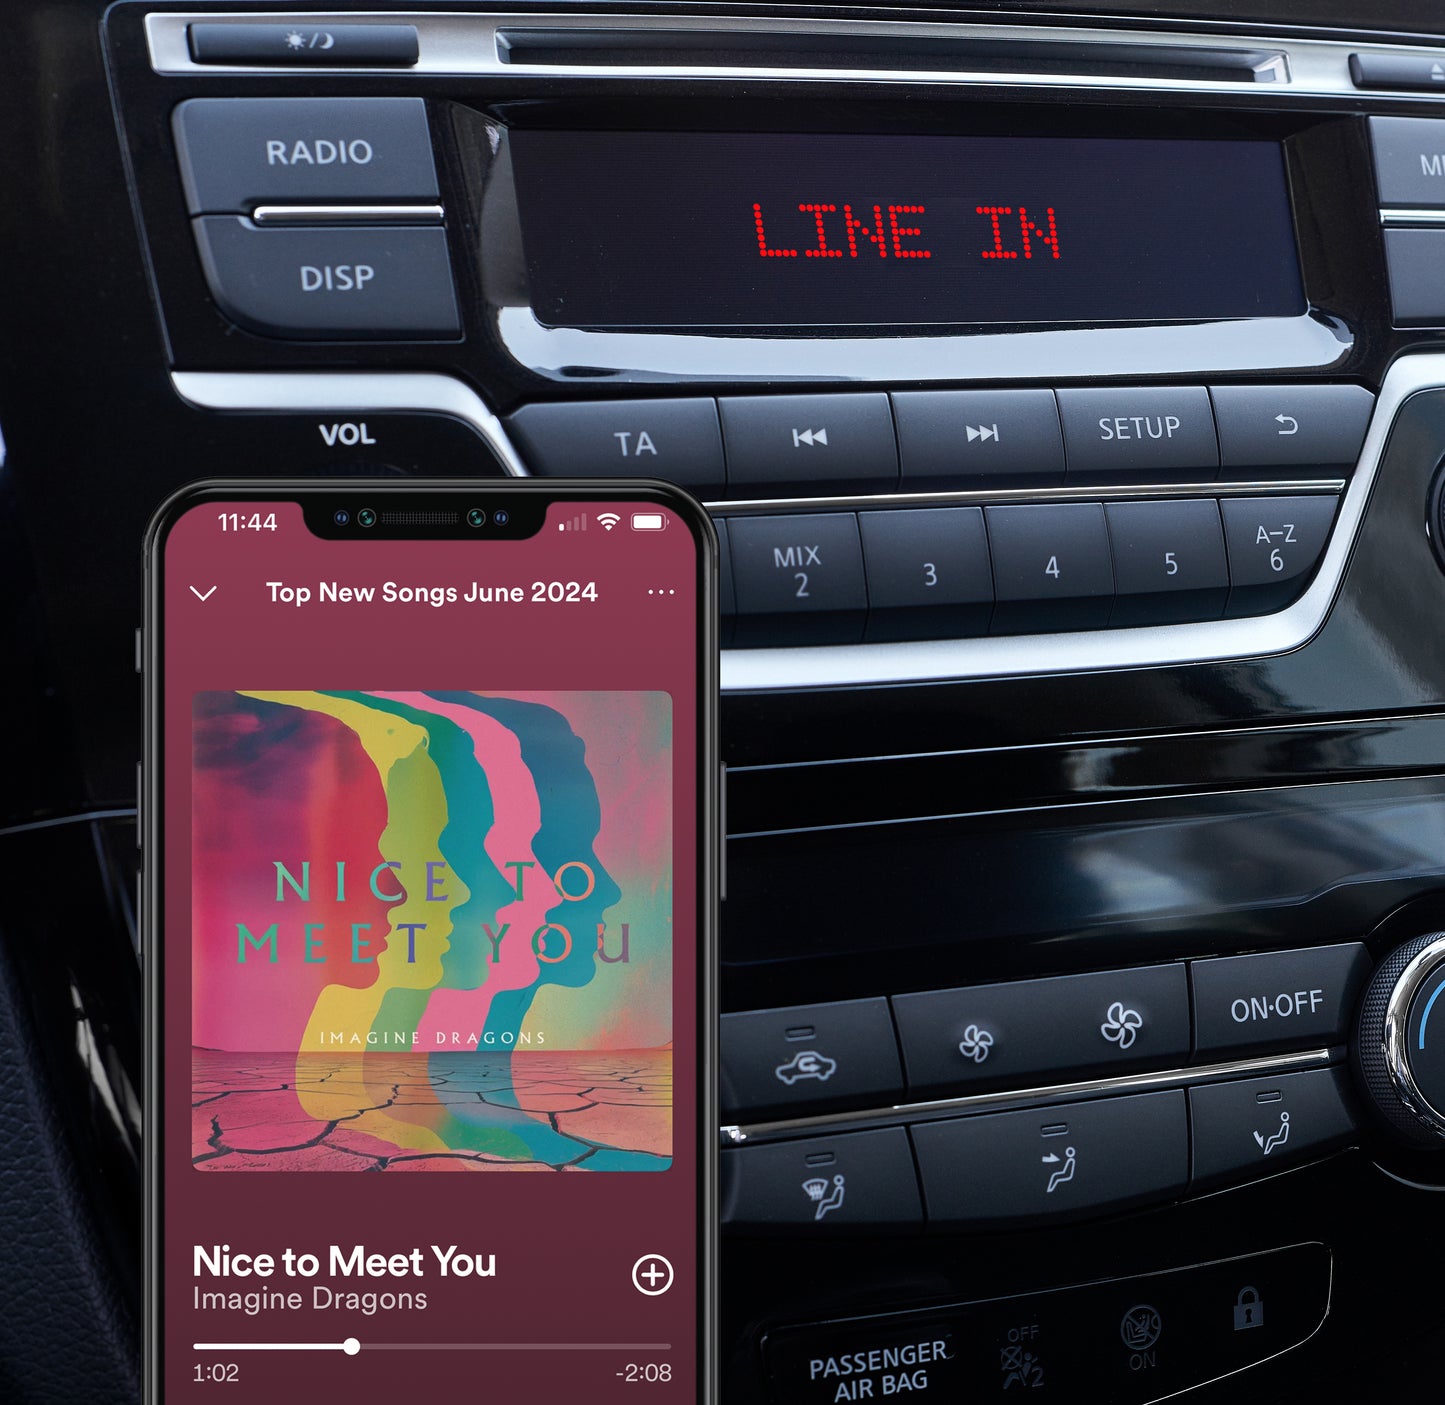 Boomboom 76 - Bluetooth receiver - Ambiance Image of smartphone streamin music to AUX/LINE IN input car radio | Marmitek